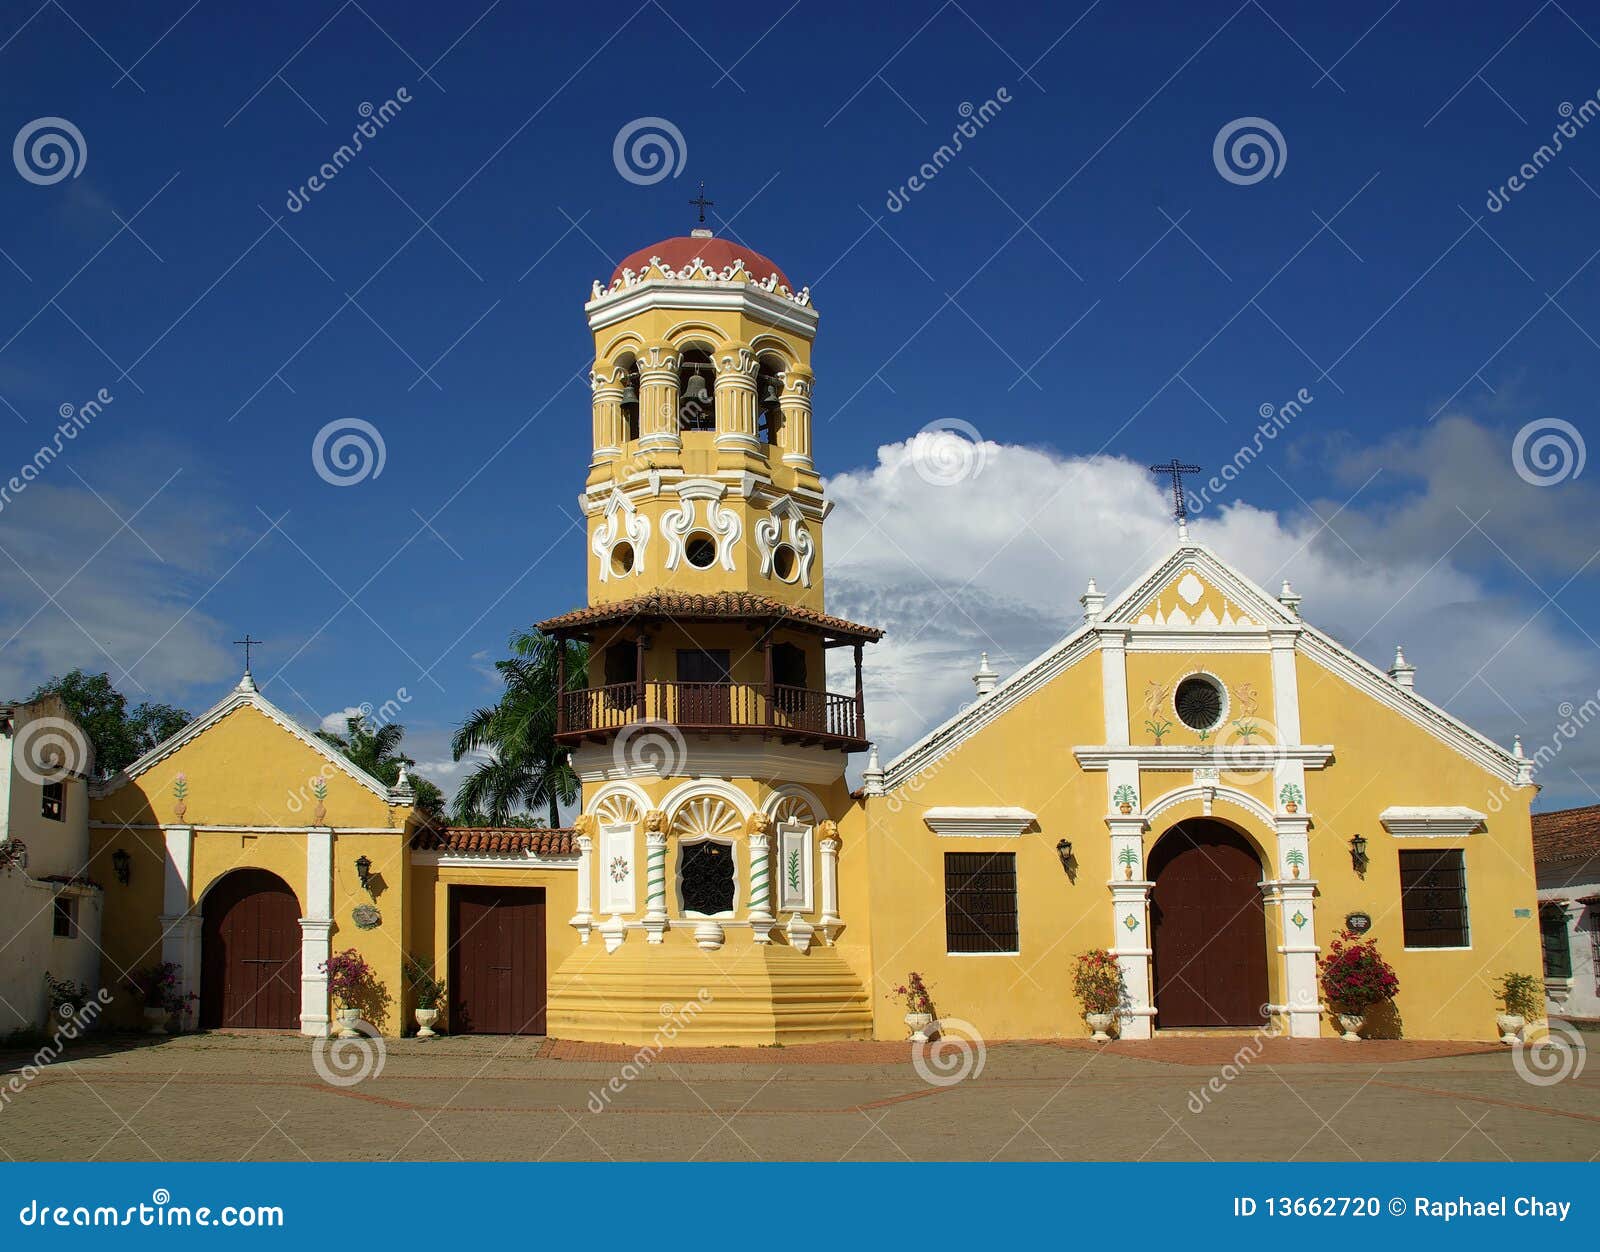 church in mompos, colombia